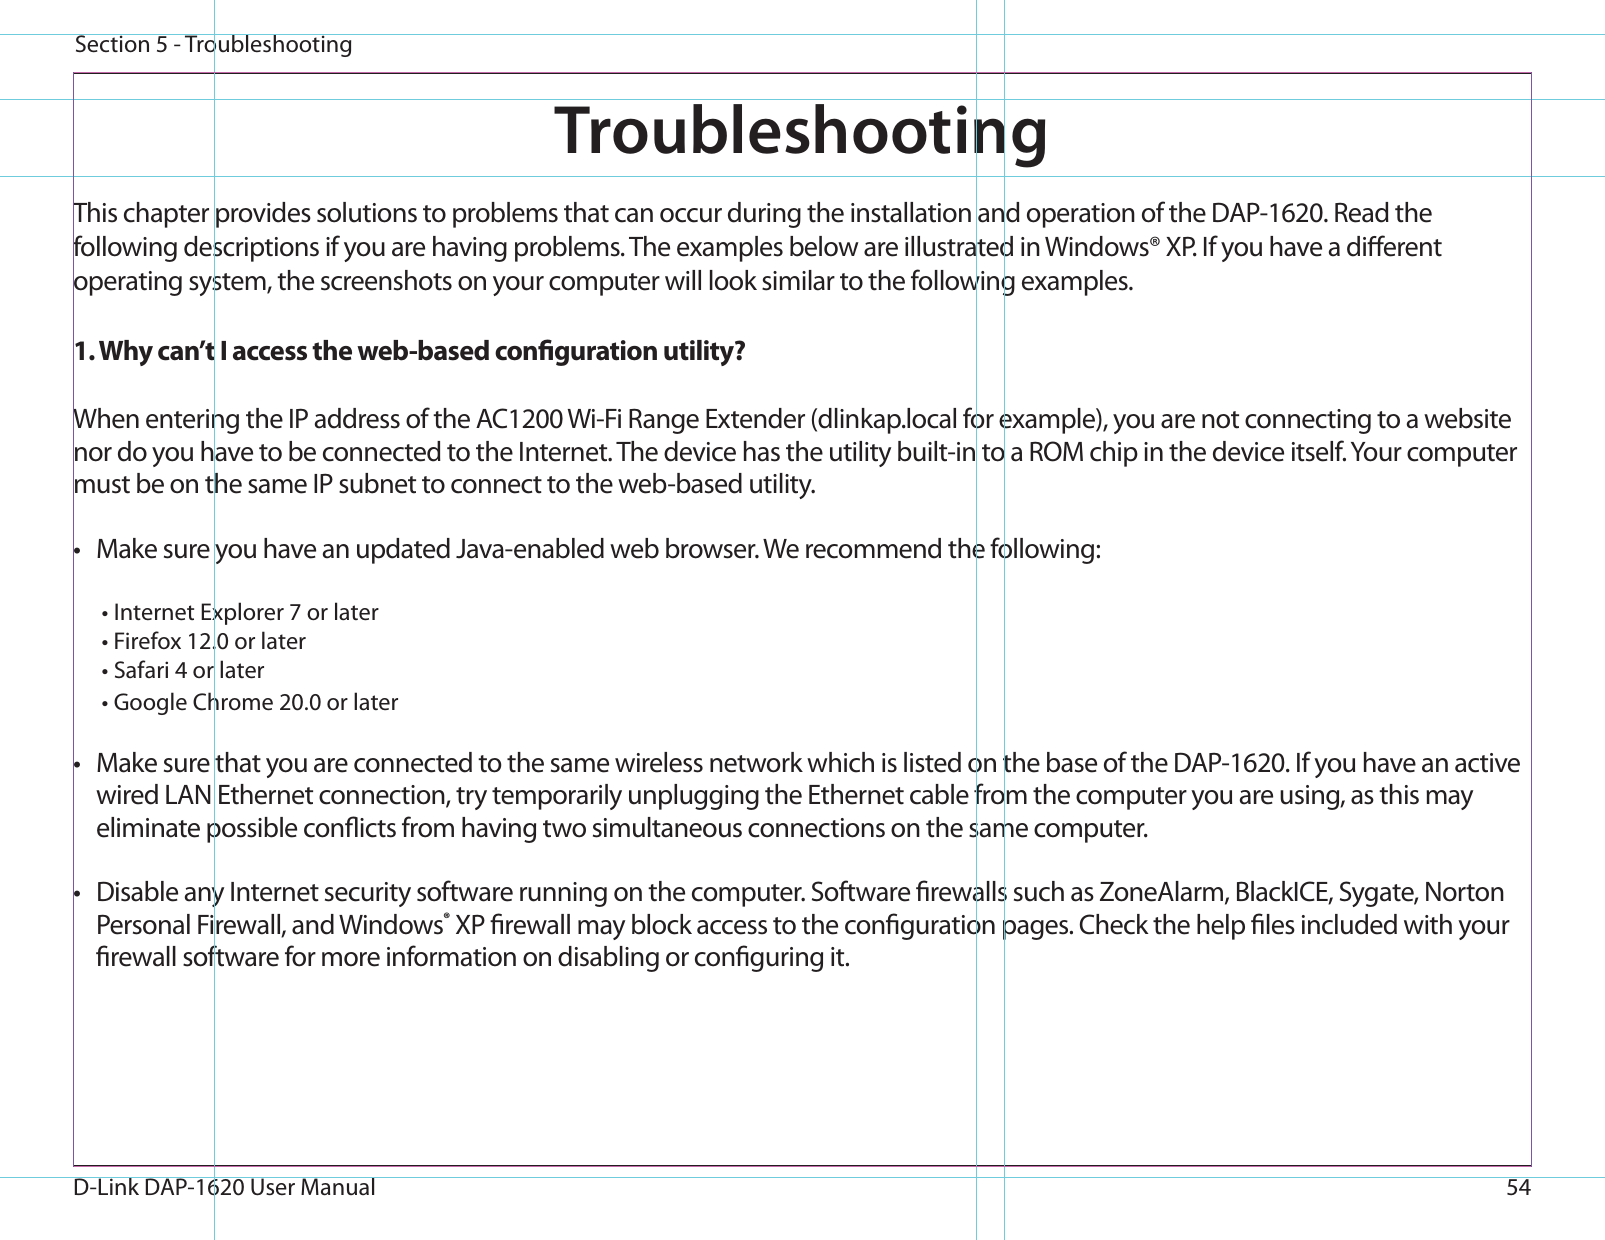 54D-Link DAP-1620 User ManualSection 5 - TroubleshootingTroubleshootingThis chapter provides solutions to problems that can occur during the installation and operation of the DAP-1620. Read the following descriptions if you are having problems. The examples below are illustrated in Windows® XP. If you have a dierent operating system, the screenshots on your computer will look similar to the following examples.1. Why can’t I access the web-based conguration utility?When entering the IP address of the AC1200 Wi-Fi Range Extender (dlinkap.local for example), you are not connecting to a website nor do you have to be connected to the Internet. The device has the utility built-in to a ROM chip in the device itself. Your computer must be on the same IP subnet to connect to the web-based utility. •  Make sure you have an updated Java-enabled web browser. We recommend the following:  • Internet Explorer 7 or later• Firefox 12.0 or later• Safari 4 or later• Google Chrome 20.0 or later•  Make sure that you are connected to the same wireless network which is listed on the base of the DAP-1620. If you have an active wired LAN Ethernet connection, try temporarily unplugging the Ethernet cable from the computer you are using, as this may eliminate possible conicts from having two simultaneous connections on the same computer. •  Disable any Internet security software running on the computer. Software rewalls such as ZoneAlarm, BlackICE, Sygate, Norton Personal Firewall, and Windows® XP rewall may block access to the conguration pages. Check the help les included with your rewall software for more information on disabling or conguring it.